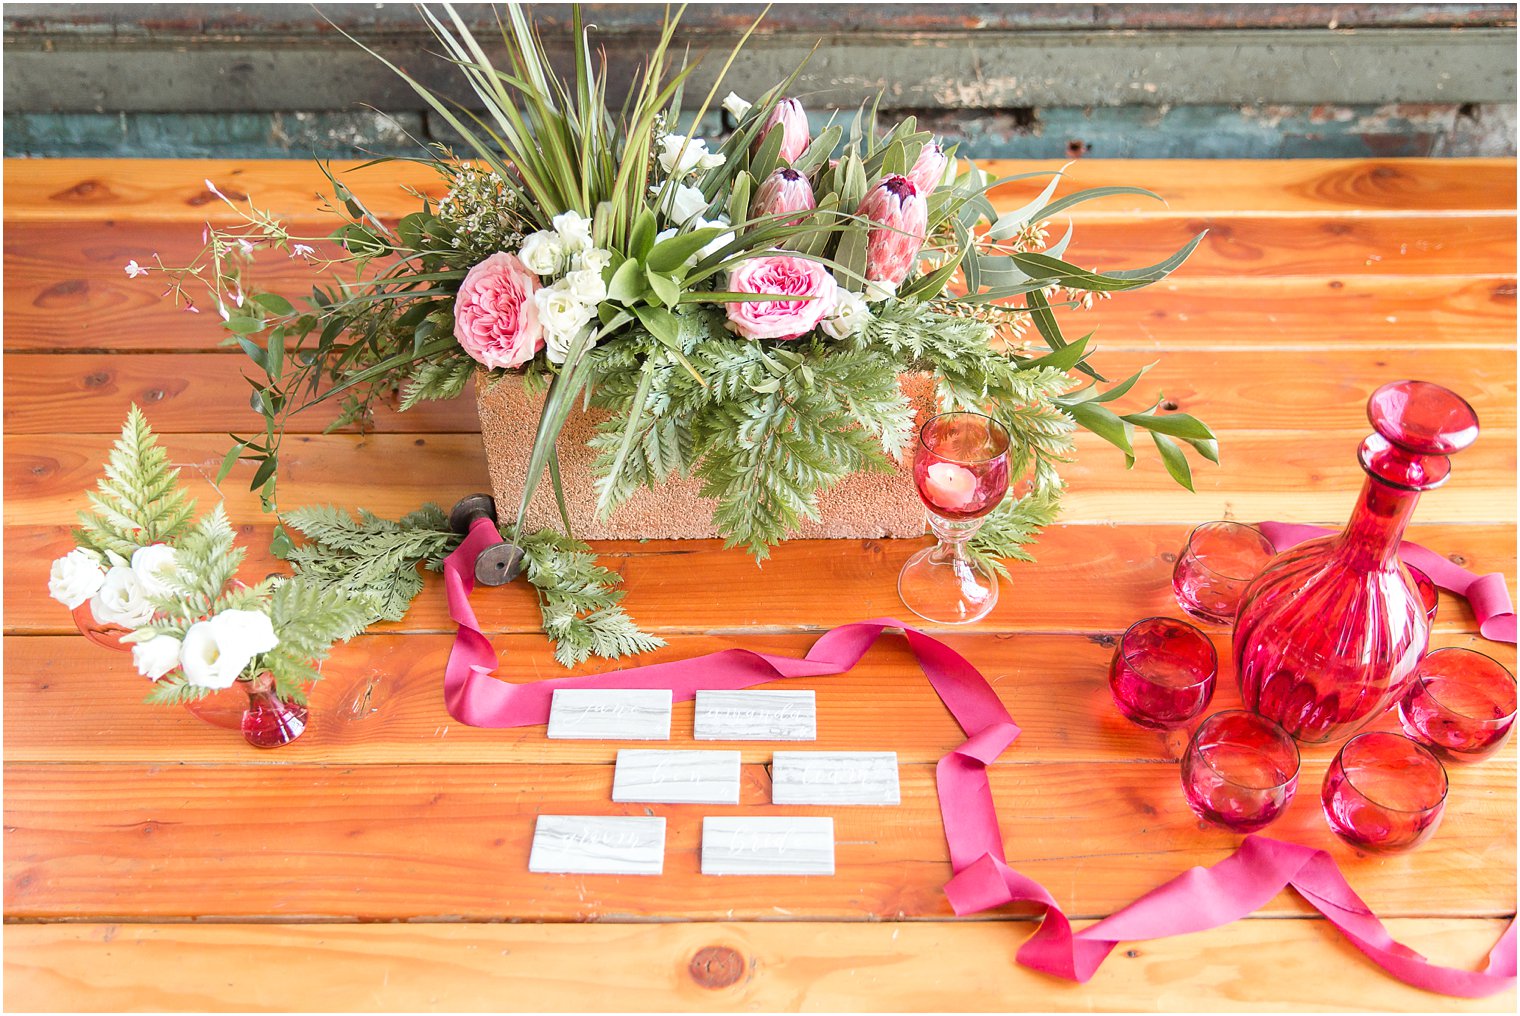 Escort card table with marble placecards